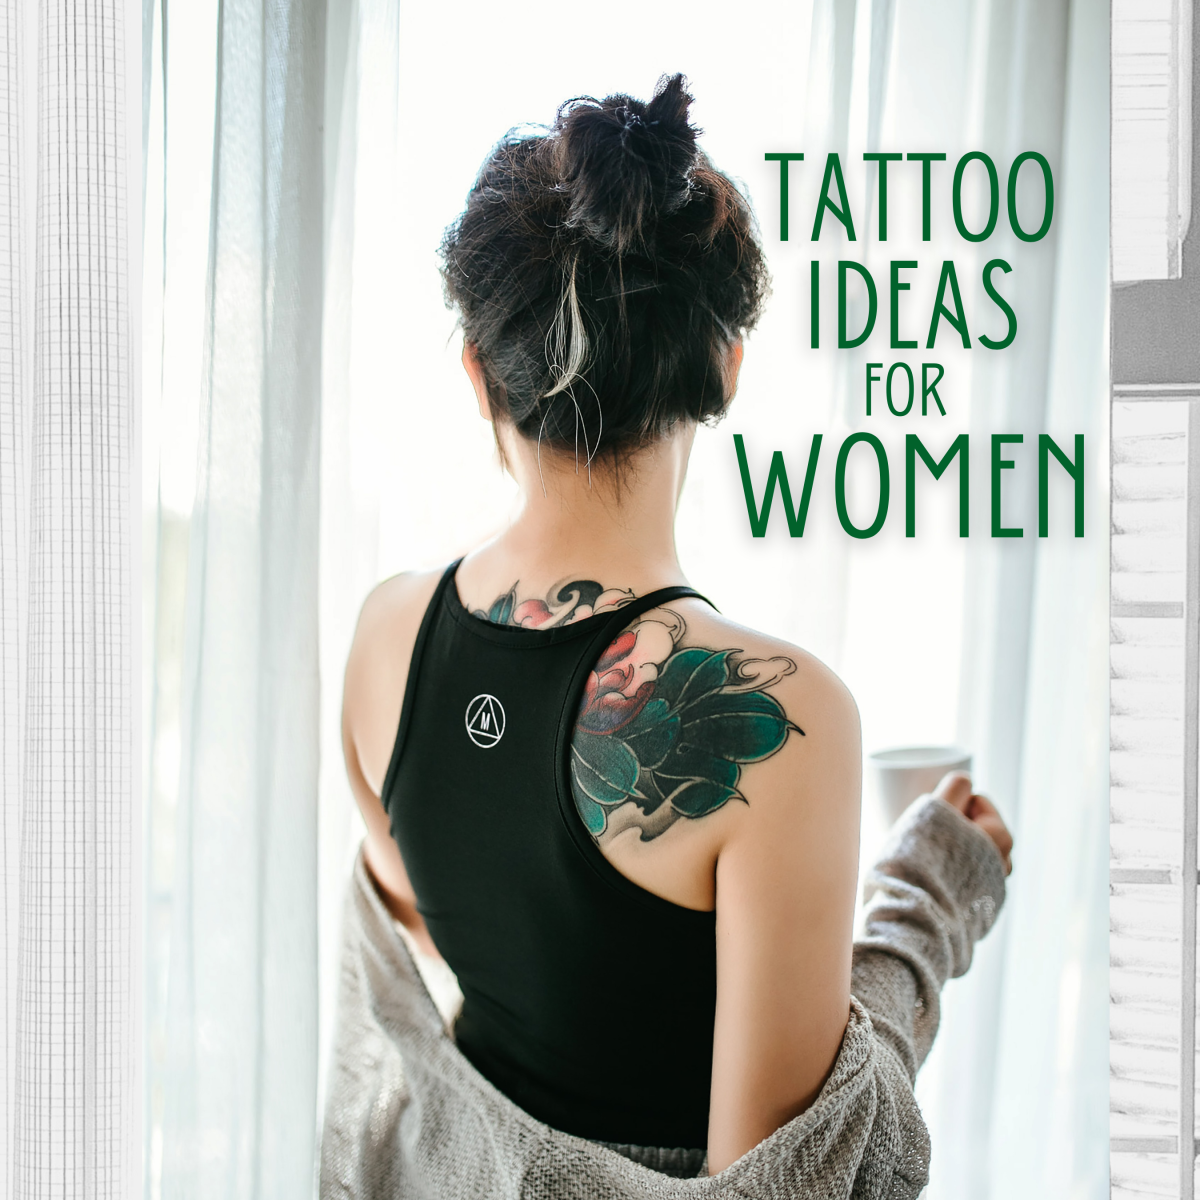 Discover some popular and beautiful tattoo options for women.